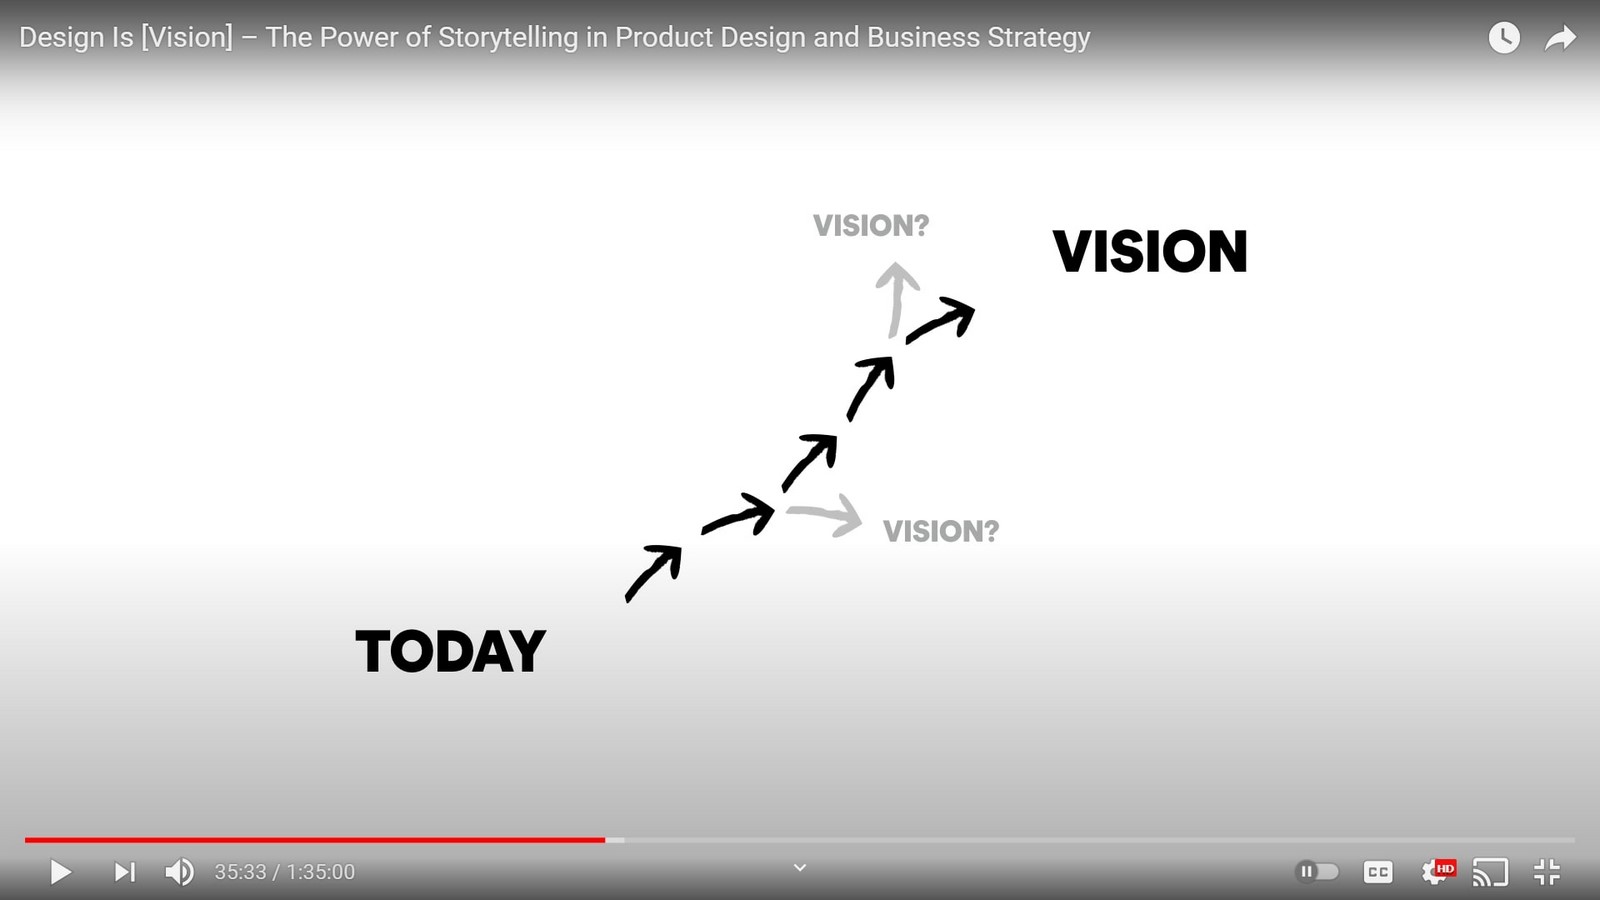 Youtube for Architects: Design Is [Vision] – The Power of Storytelling in Product Design and Business Strategy - Sheet2